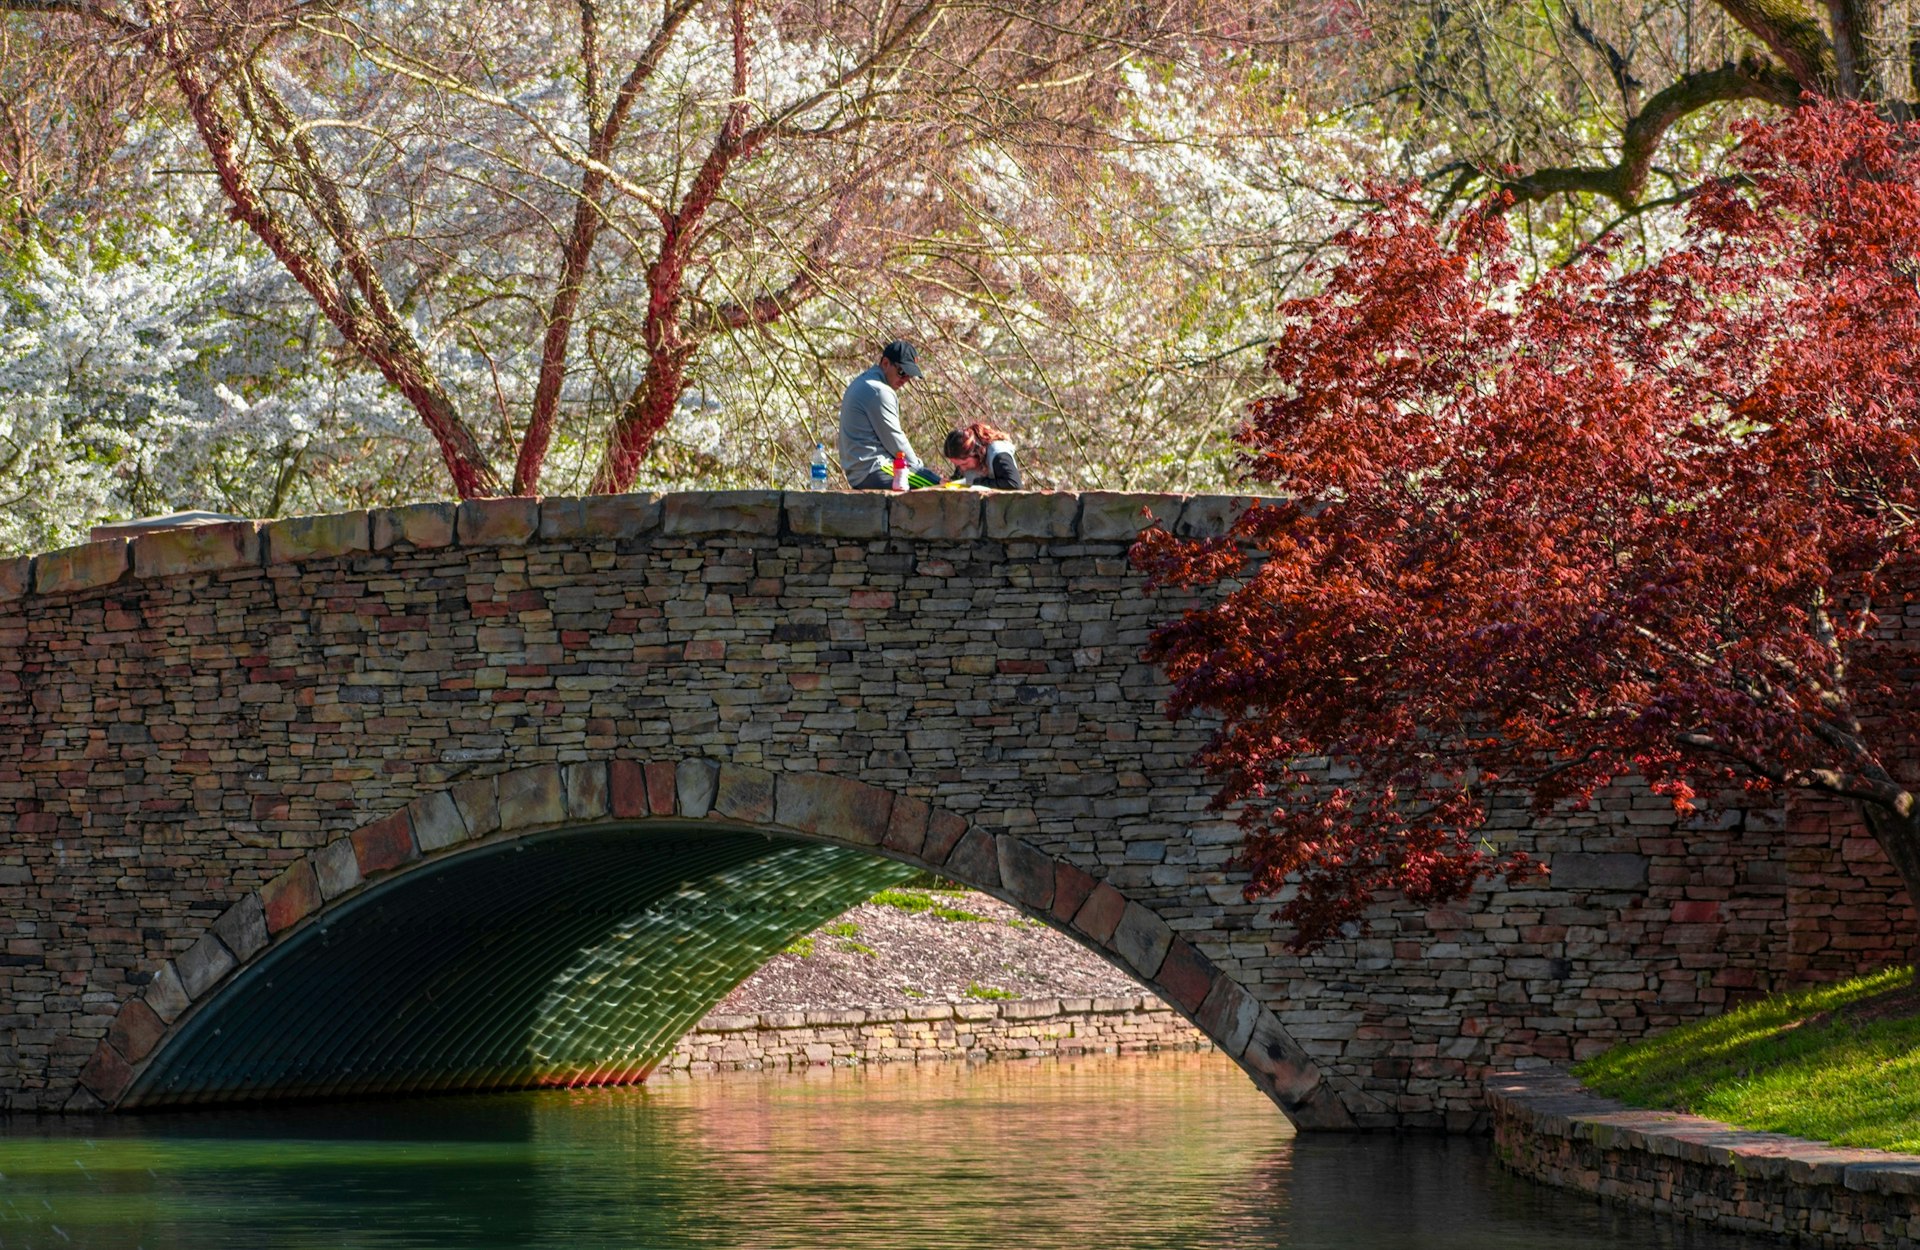 A man sitting on the stone bridge at Freedom Park in Charlotte, NC looks down at a woman who appears to be drawing. There is a body of water under the bridge and blooming tree on the right side of the image.